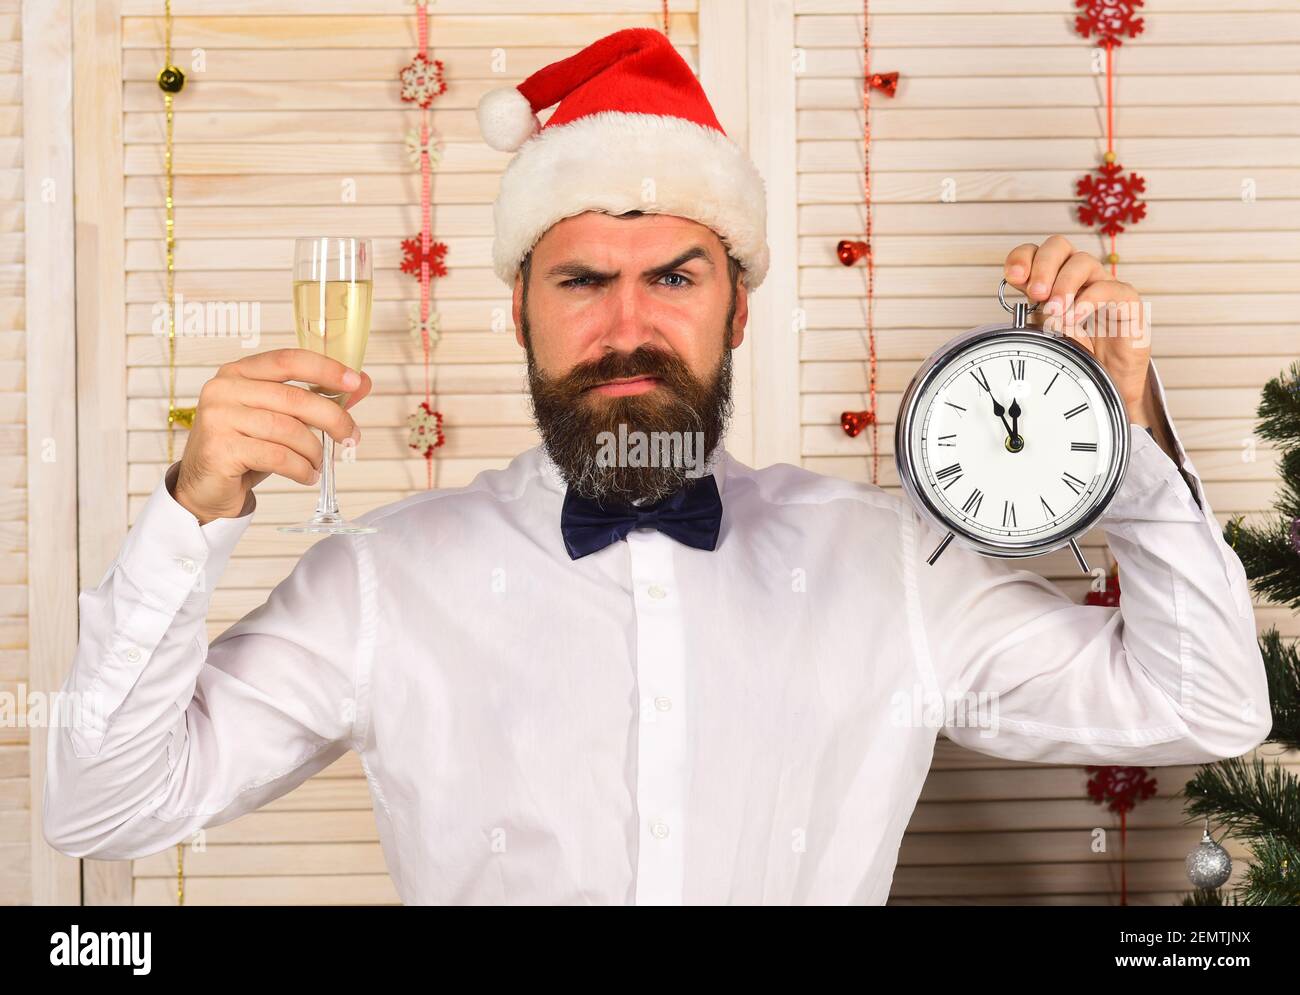 Santa Claus in red hat with angry face in festive room. Guy on wooden wall background with garlands. Celebration and New Year time concept. Man with beard holds glass of champagne and alarm clock Stock Photo